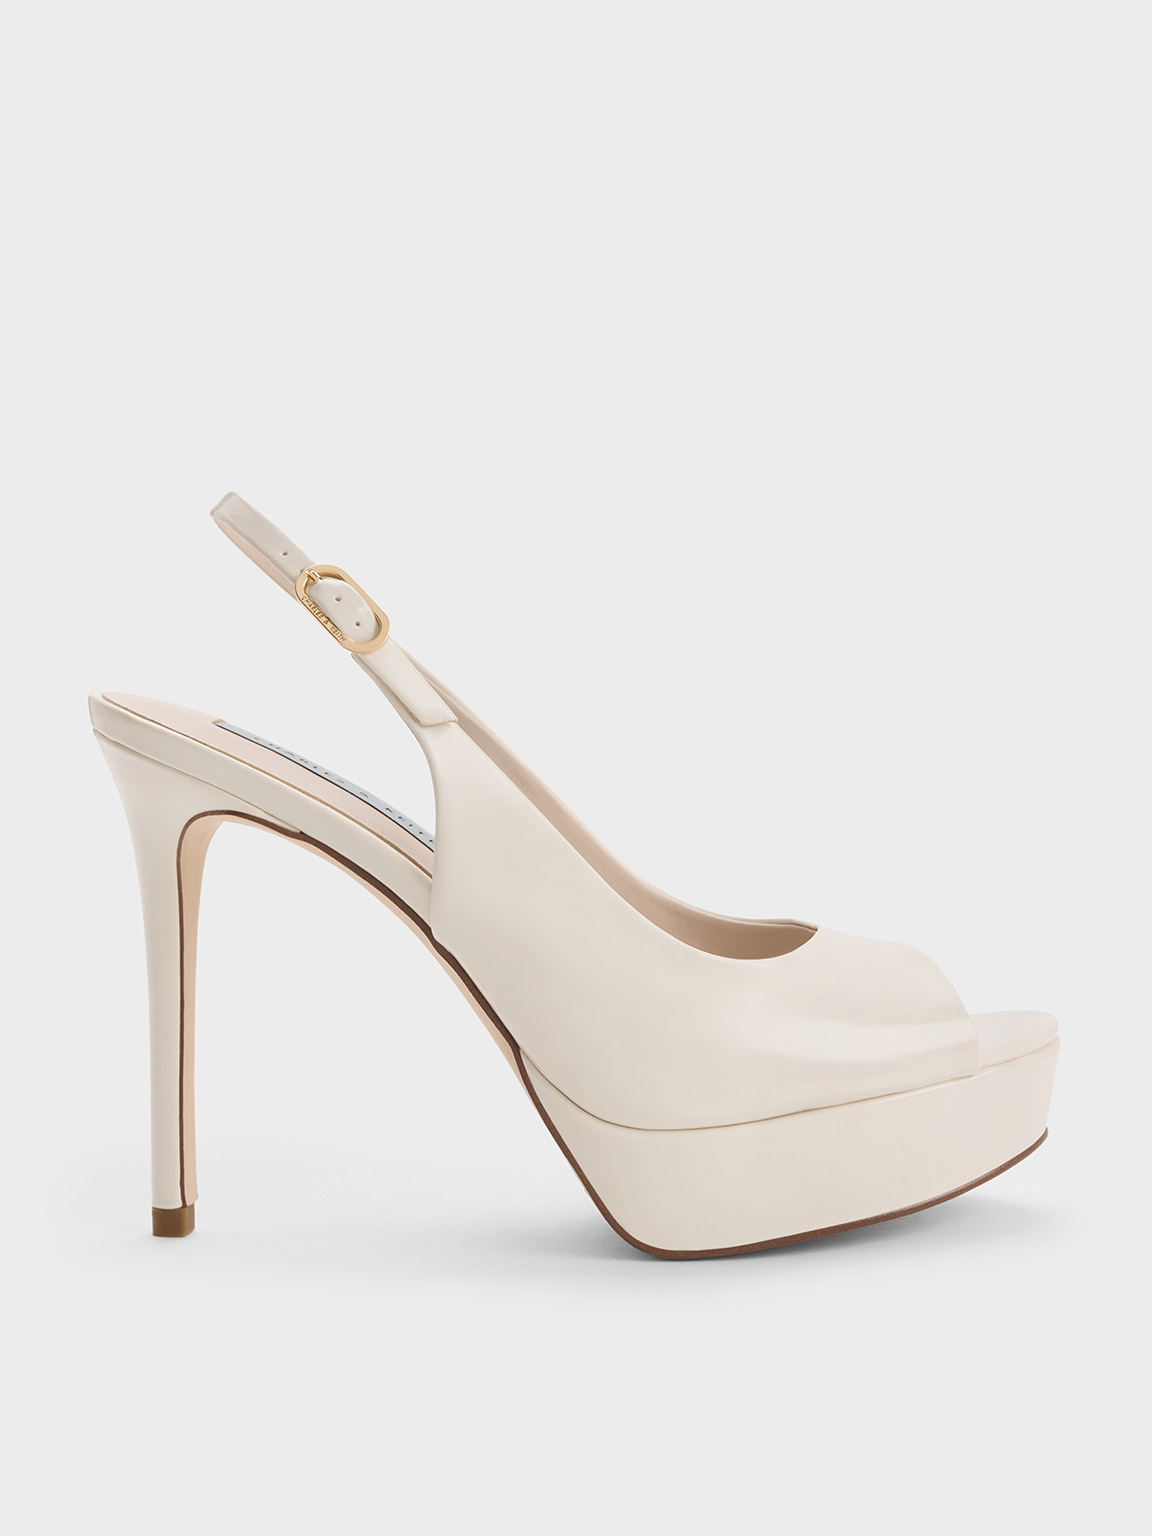 Women's Shoes | Shop Exclusive Styles | CHARLES & KEITH IN